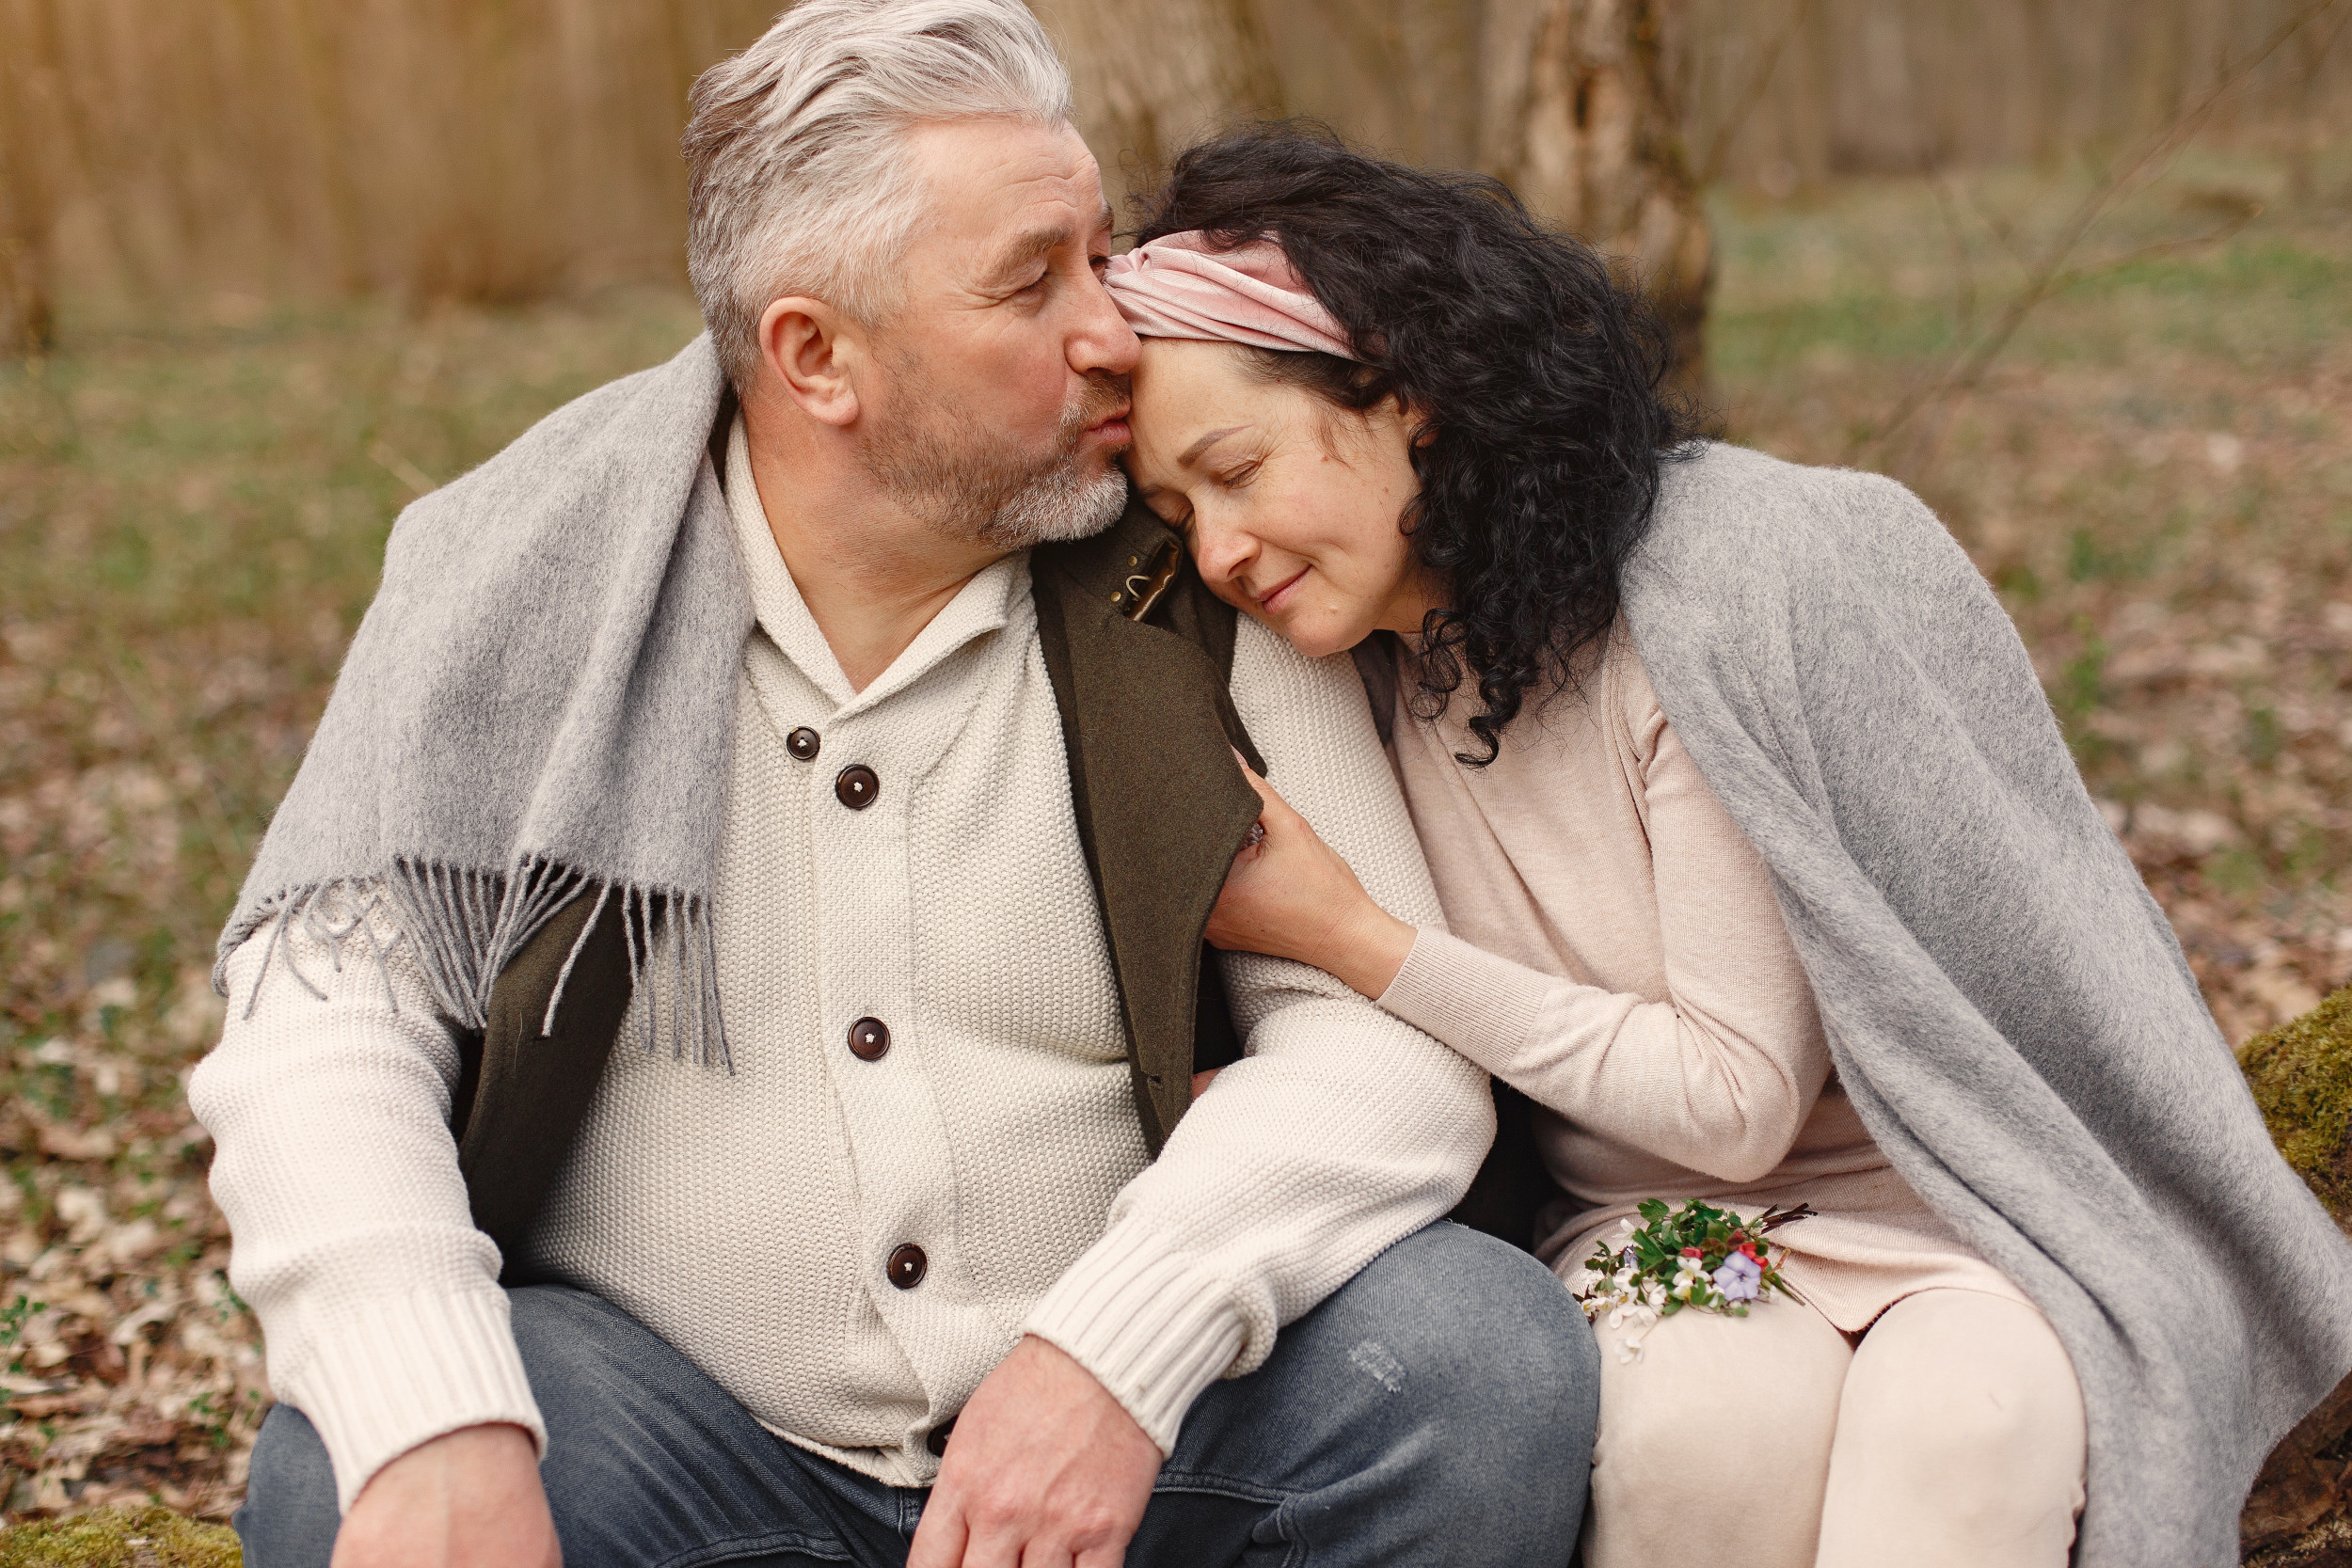 Top 9 Dating Sites For Seniors 50 And Over Looking For Love